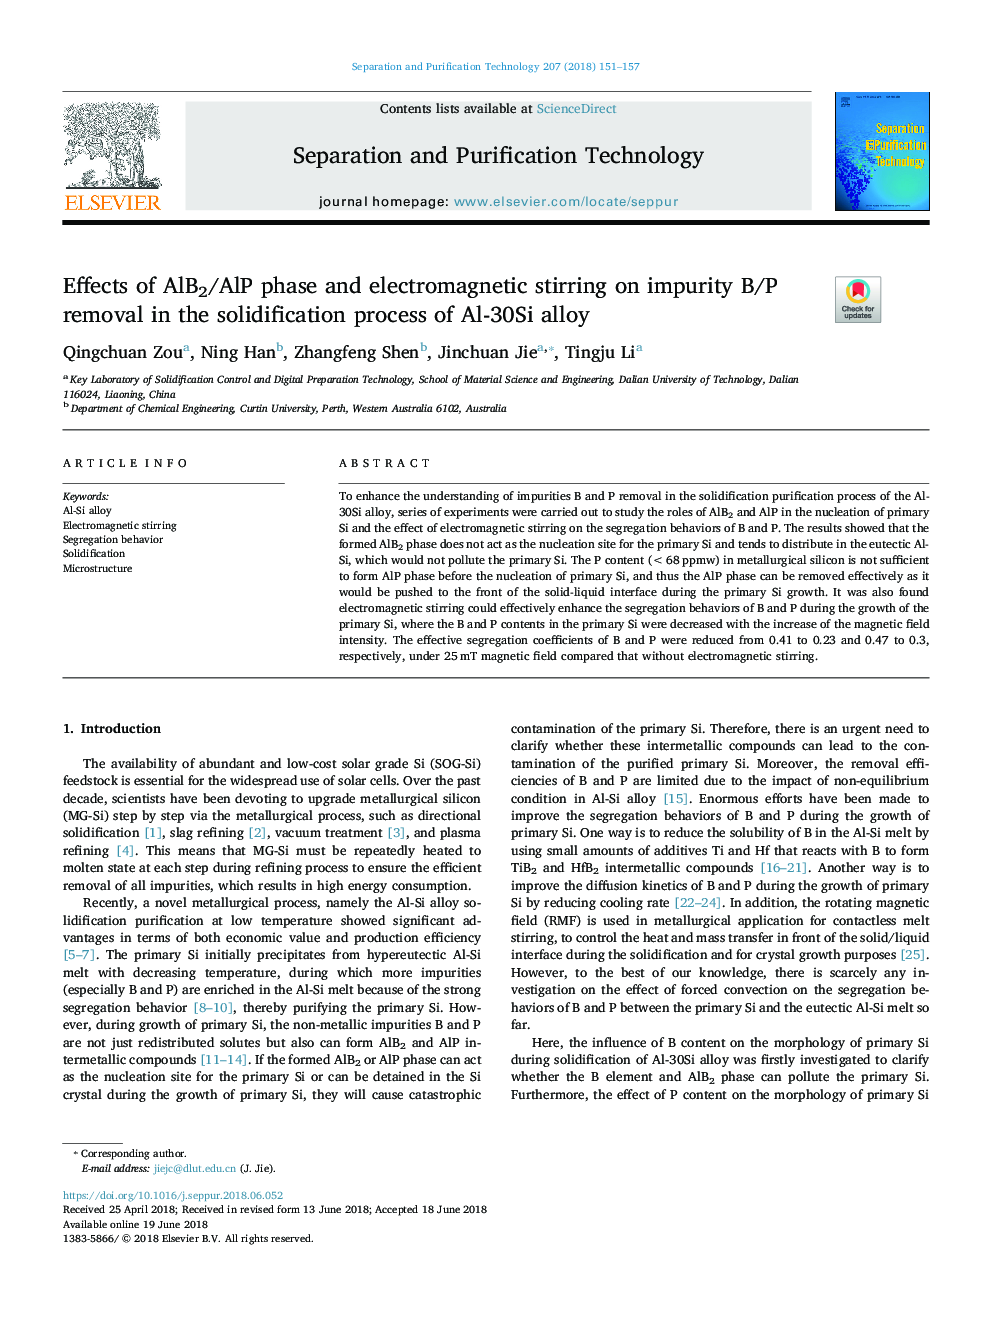 Effects of AlB2/AlP phase and electromagnetic stirring on impurity B/P removal in the solidification process of Al-30Si alloy